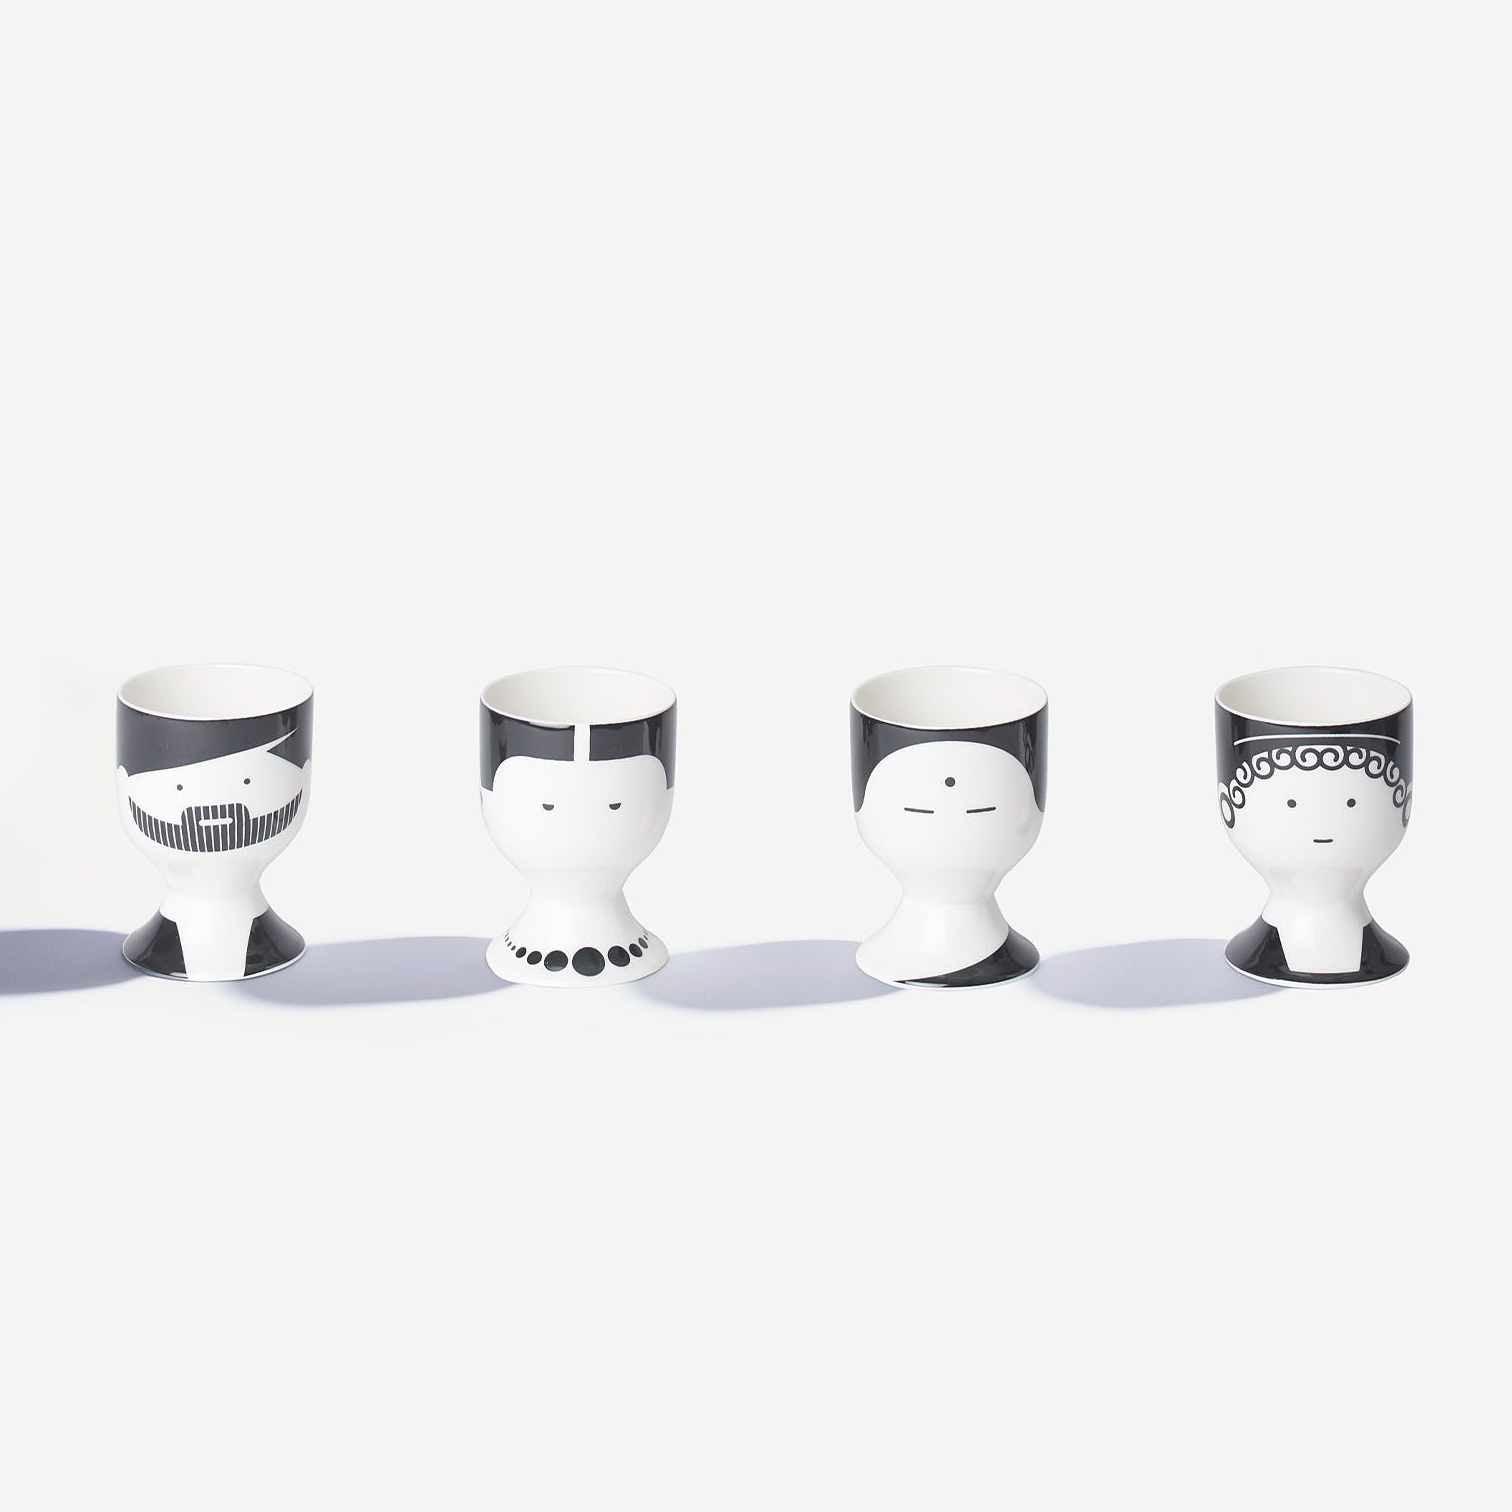 EGG CUP PHILOSOPHERS | 4 parcelain egg cups | The School of Life